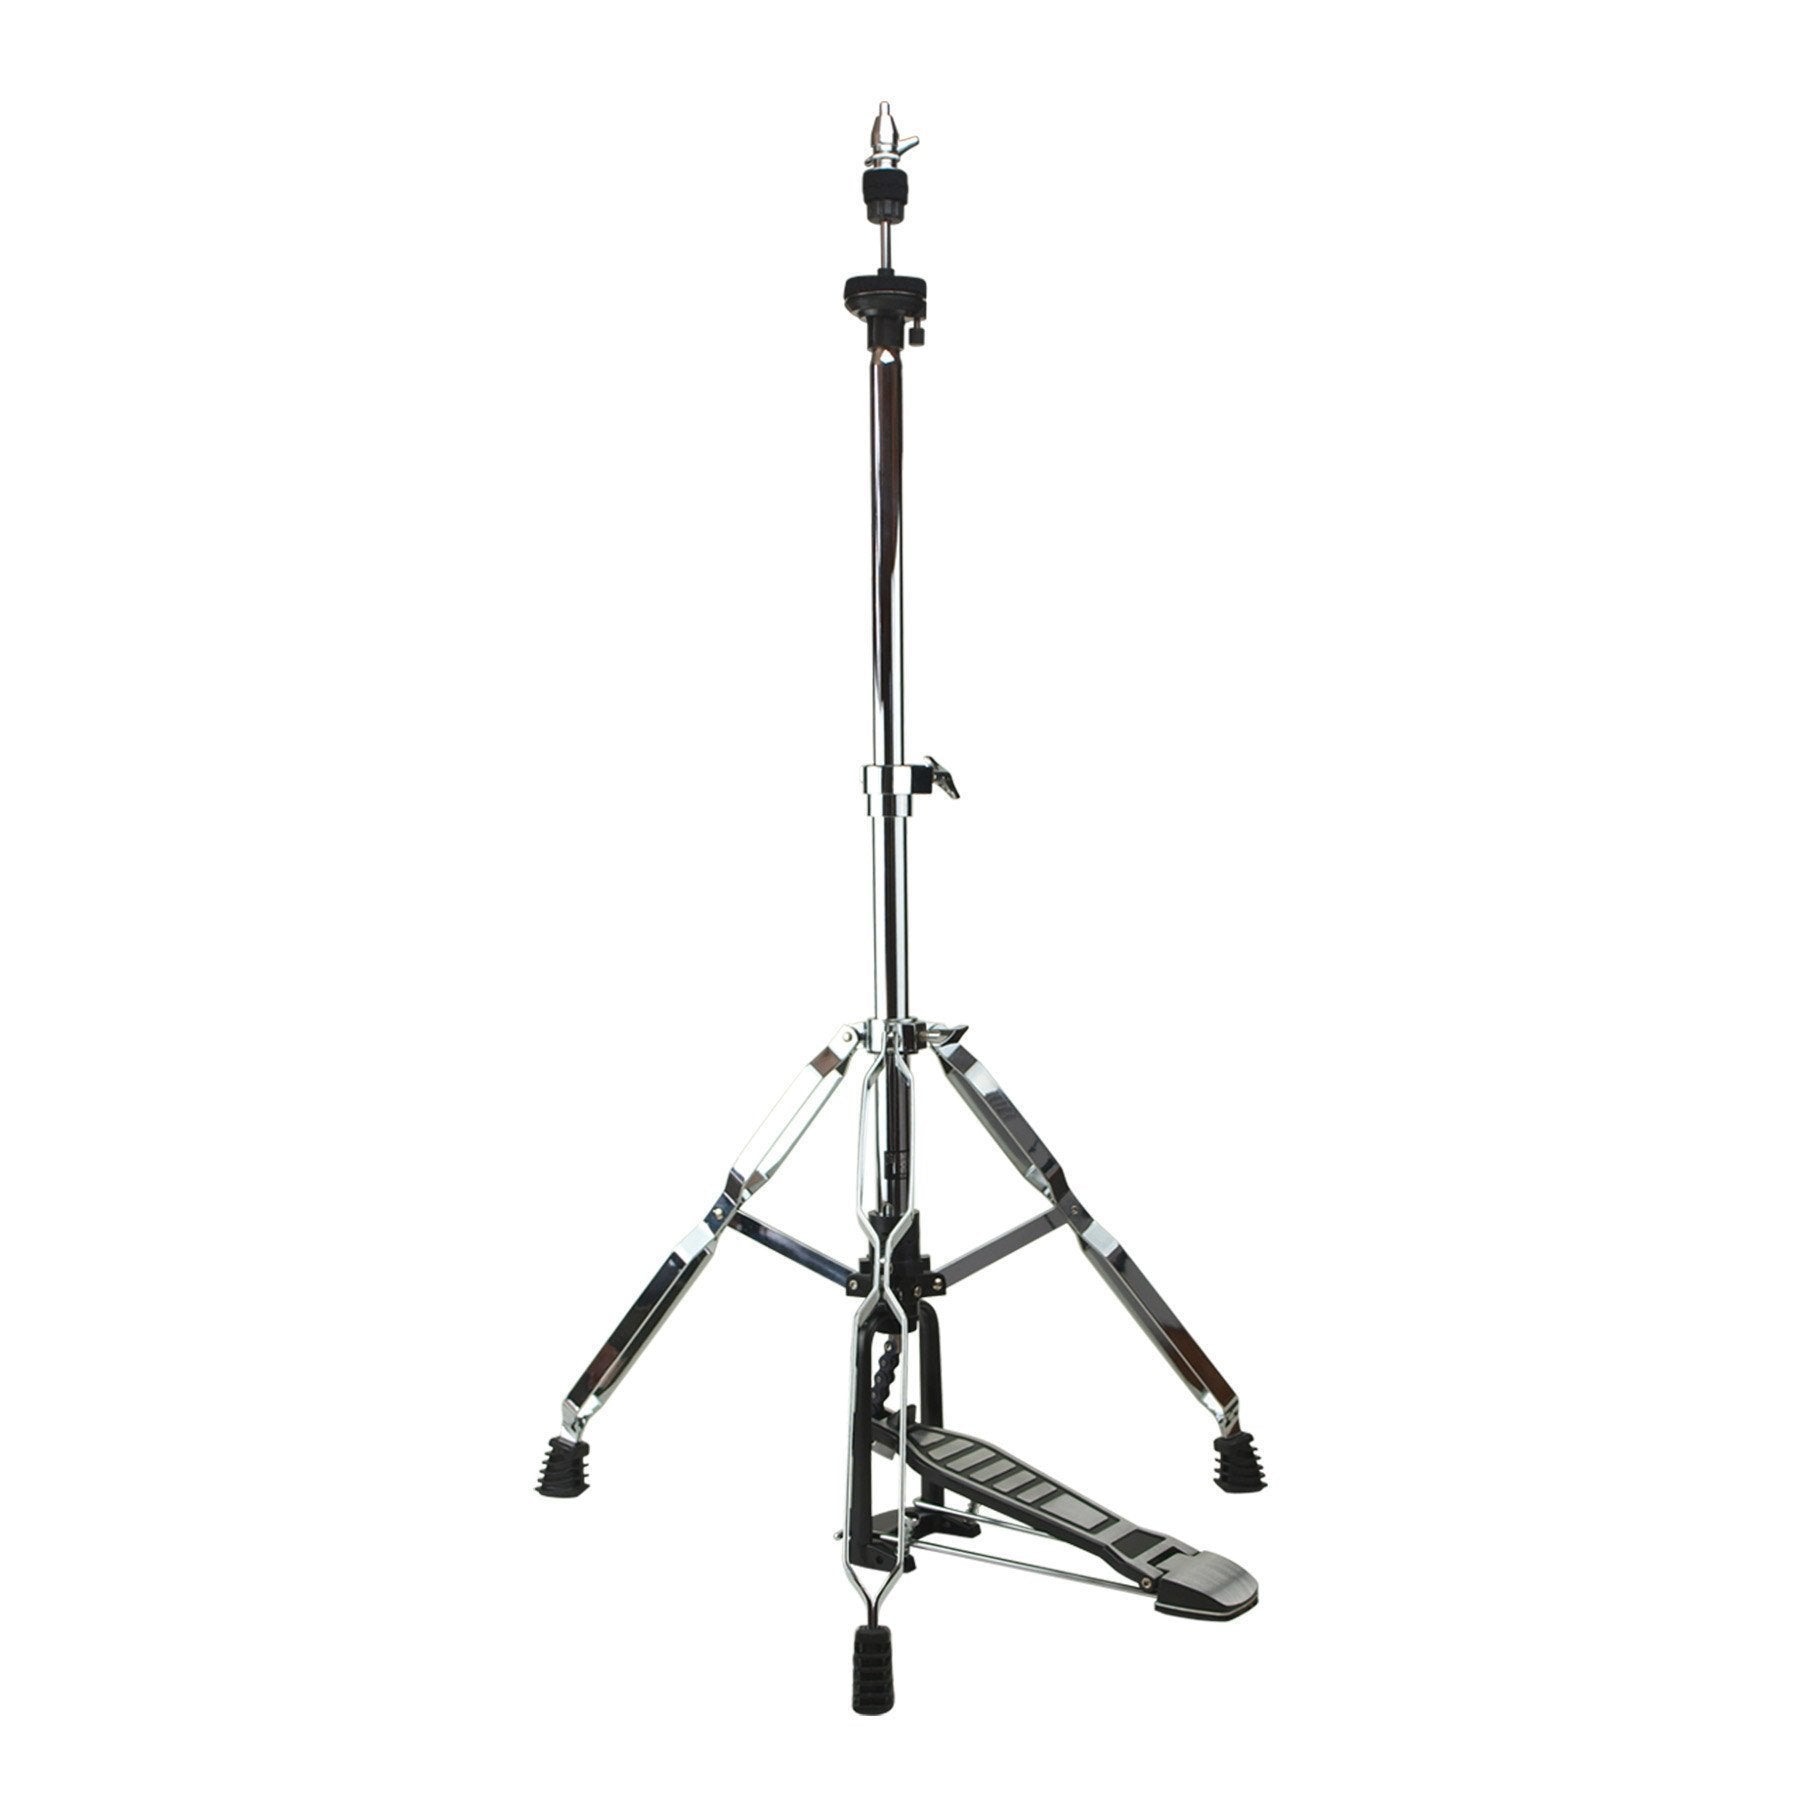 Sonic Drive Deluxe Heavy-Duty Hi-Hat Stand-SDP-HHS-4C